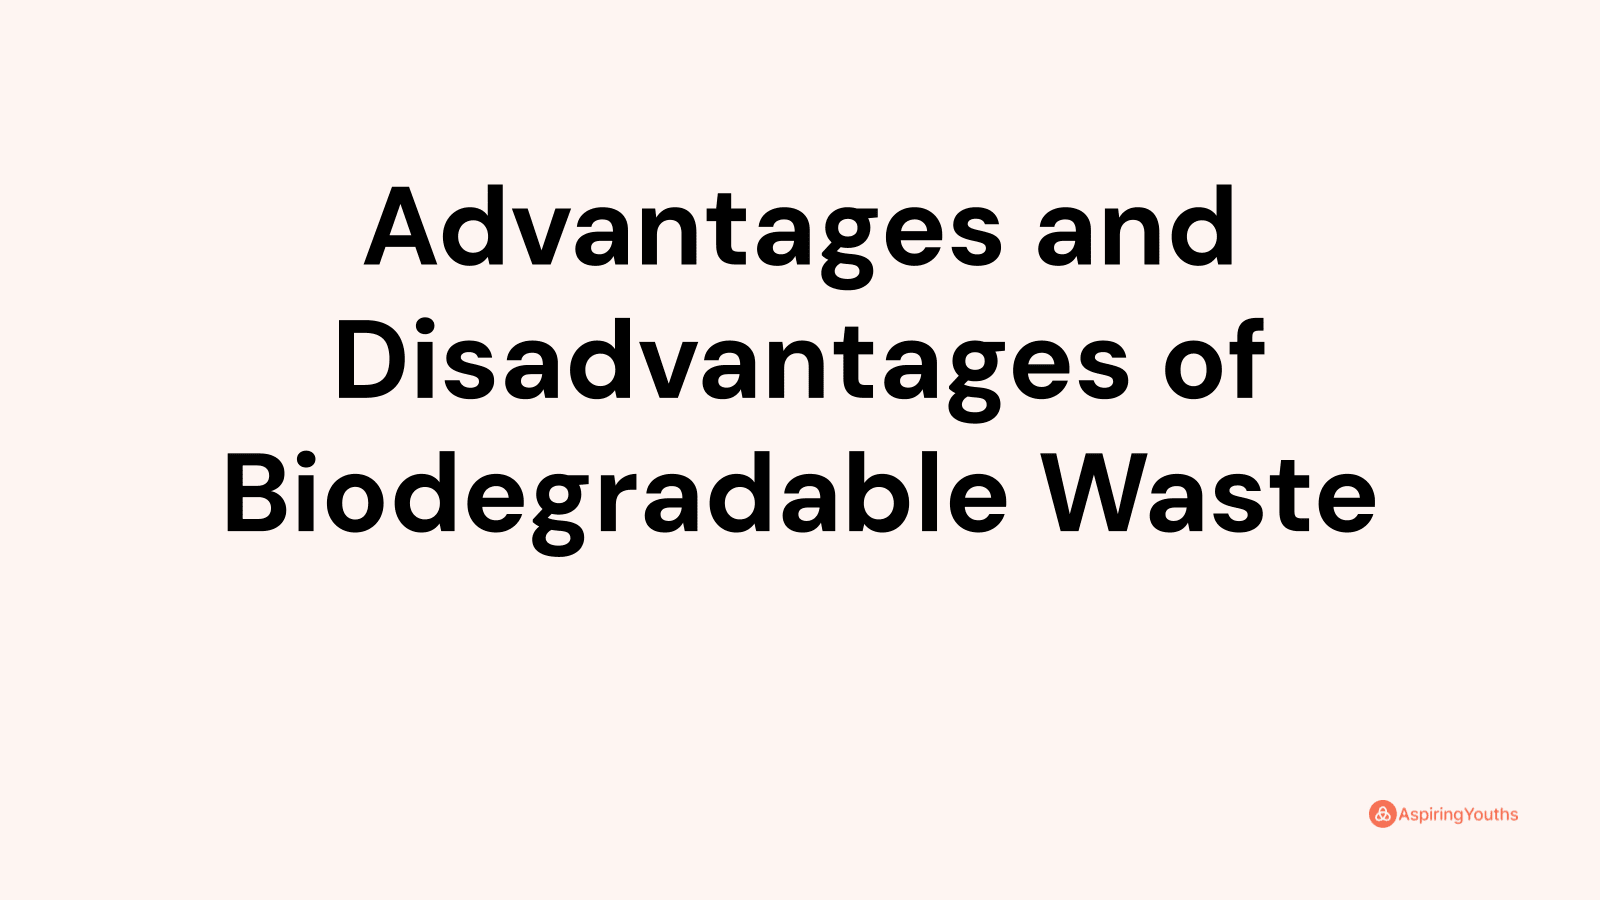 Advantages and disadvantages of Biodegradable Waste